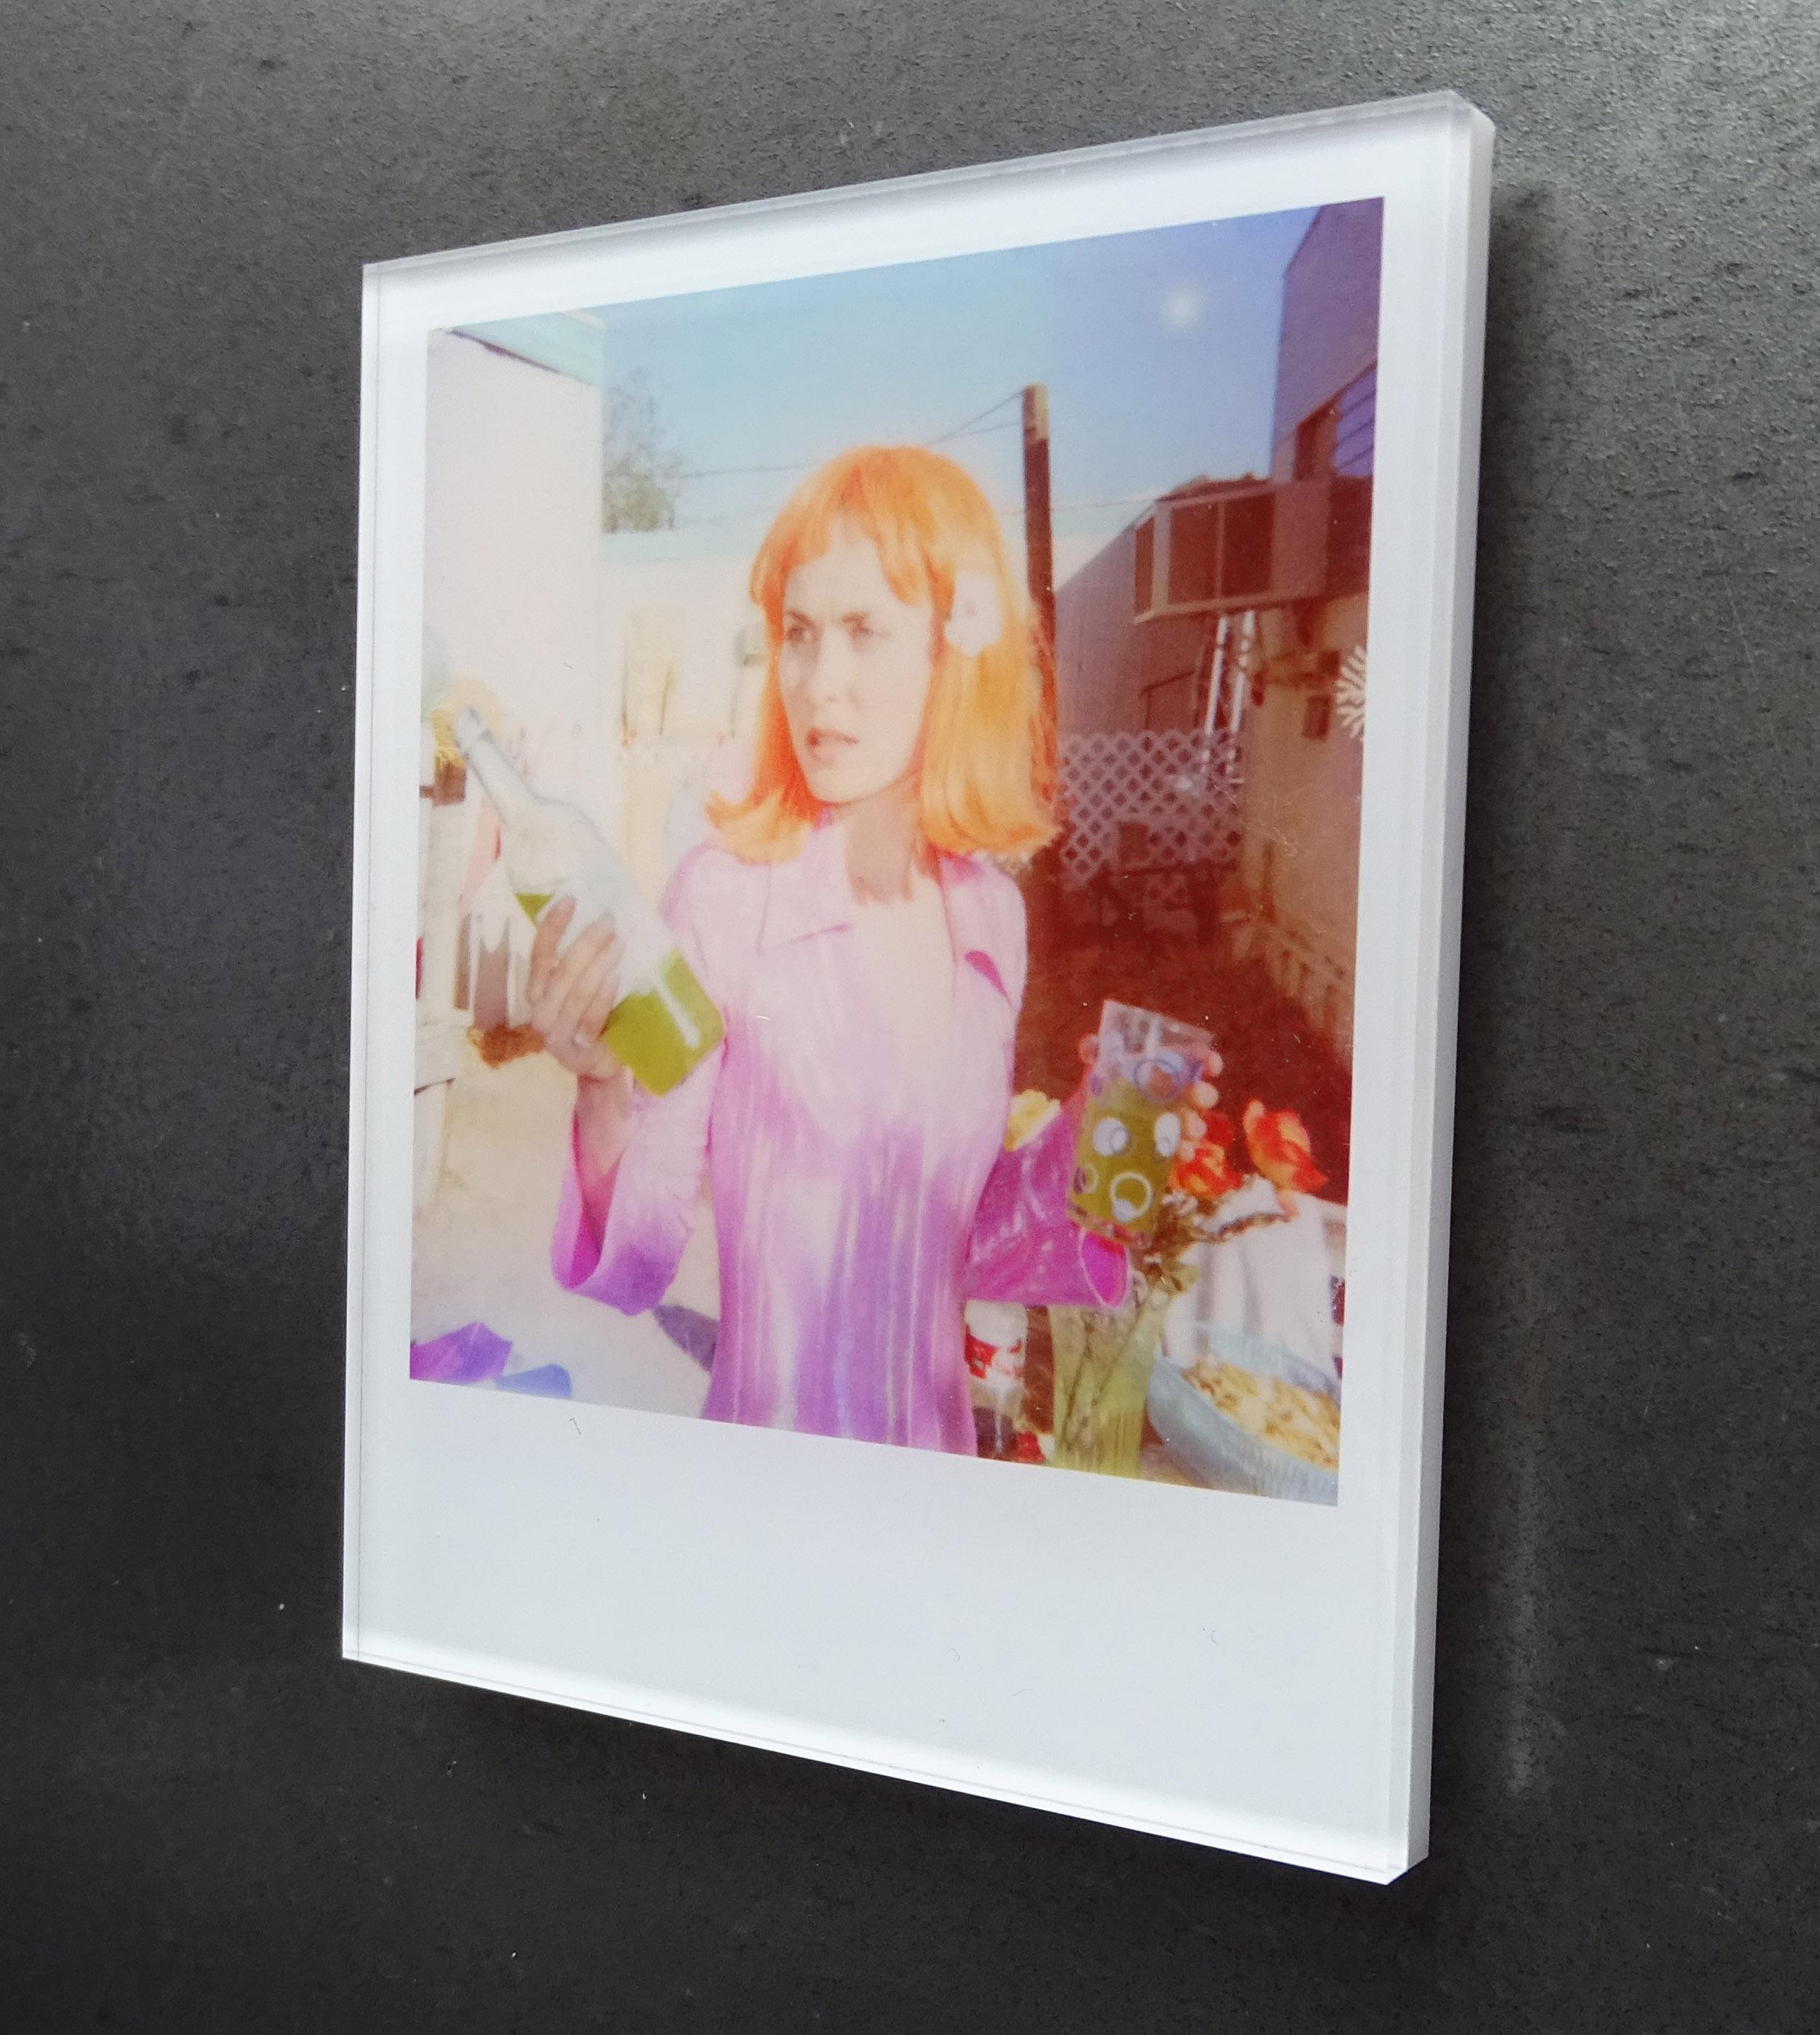 Stefanie Schneider's Minis
American Pie (Oxana's 30th Birthday), 2008
featuring Radha Mitchell

Signed and signature brand on verso.
Lambda digital Color Photographs based on a Polaroid.
Sandwiched in between Plexiglass (thickness 0.7cm)

Polaroid